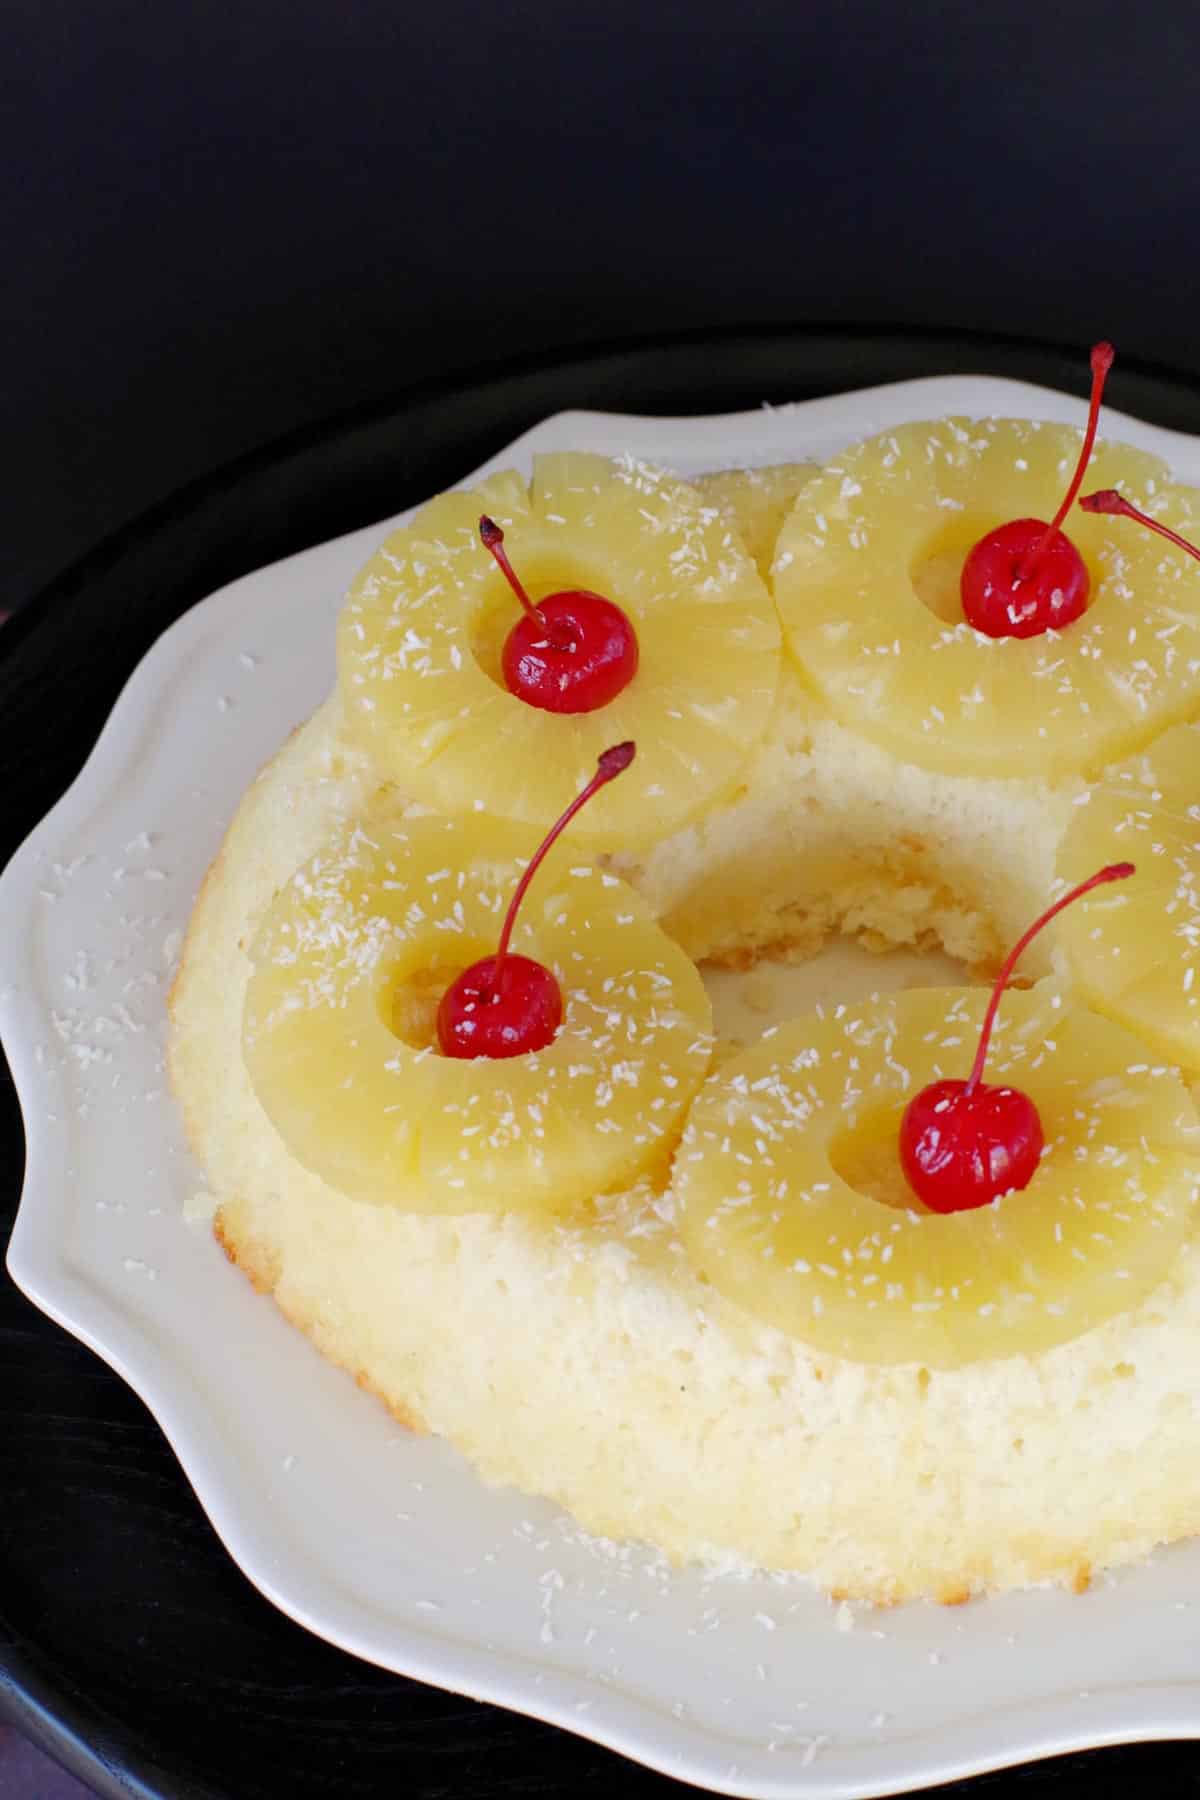 ww pineapple (pina colada) cake garnished with pineapple and cherries on a white plate